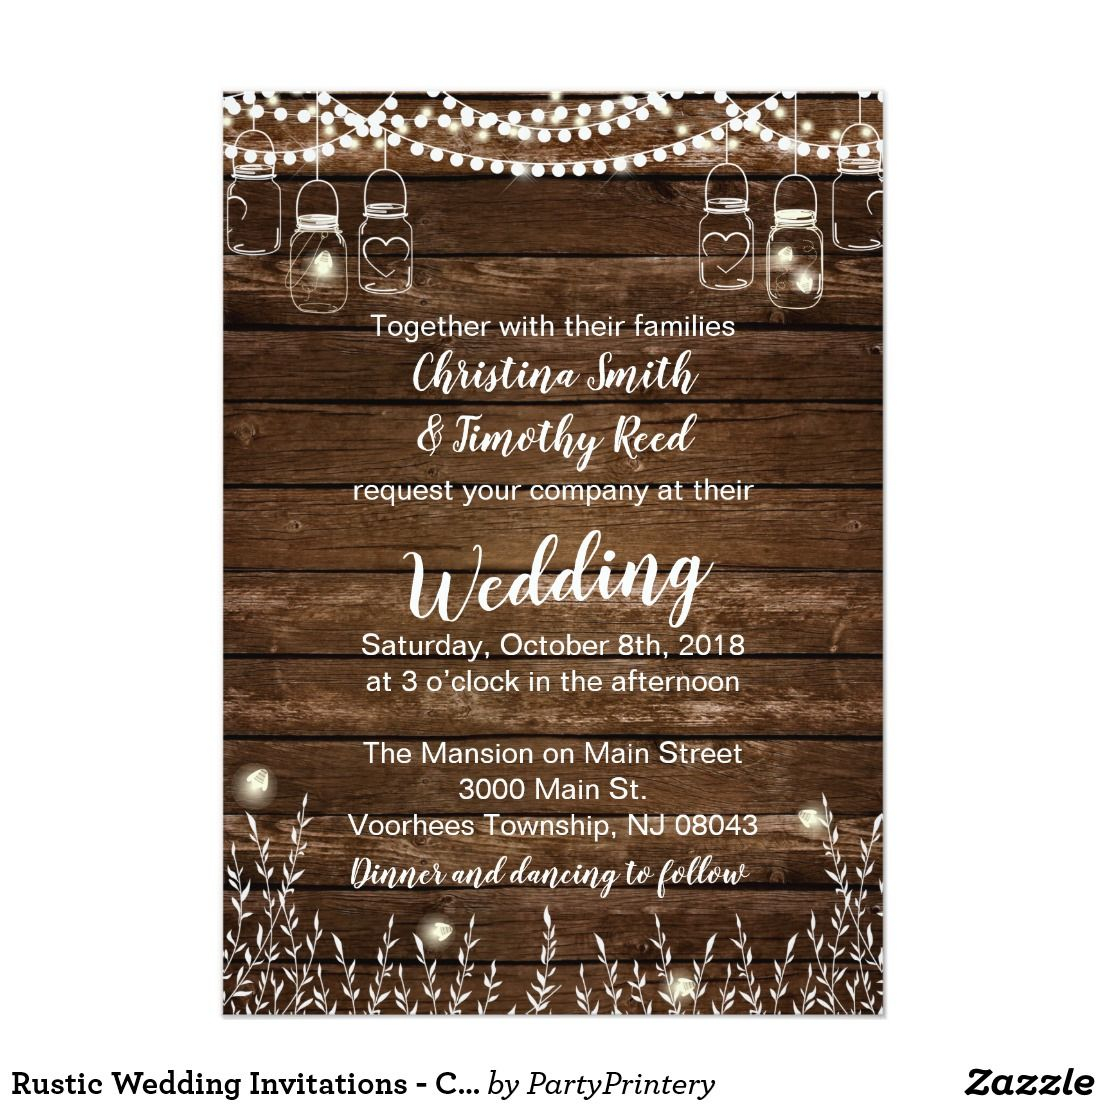 Country Themed Wedding Invitations Rustic Wedding Invitations Country Wedding In 2018 Wedding